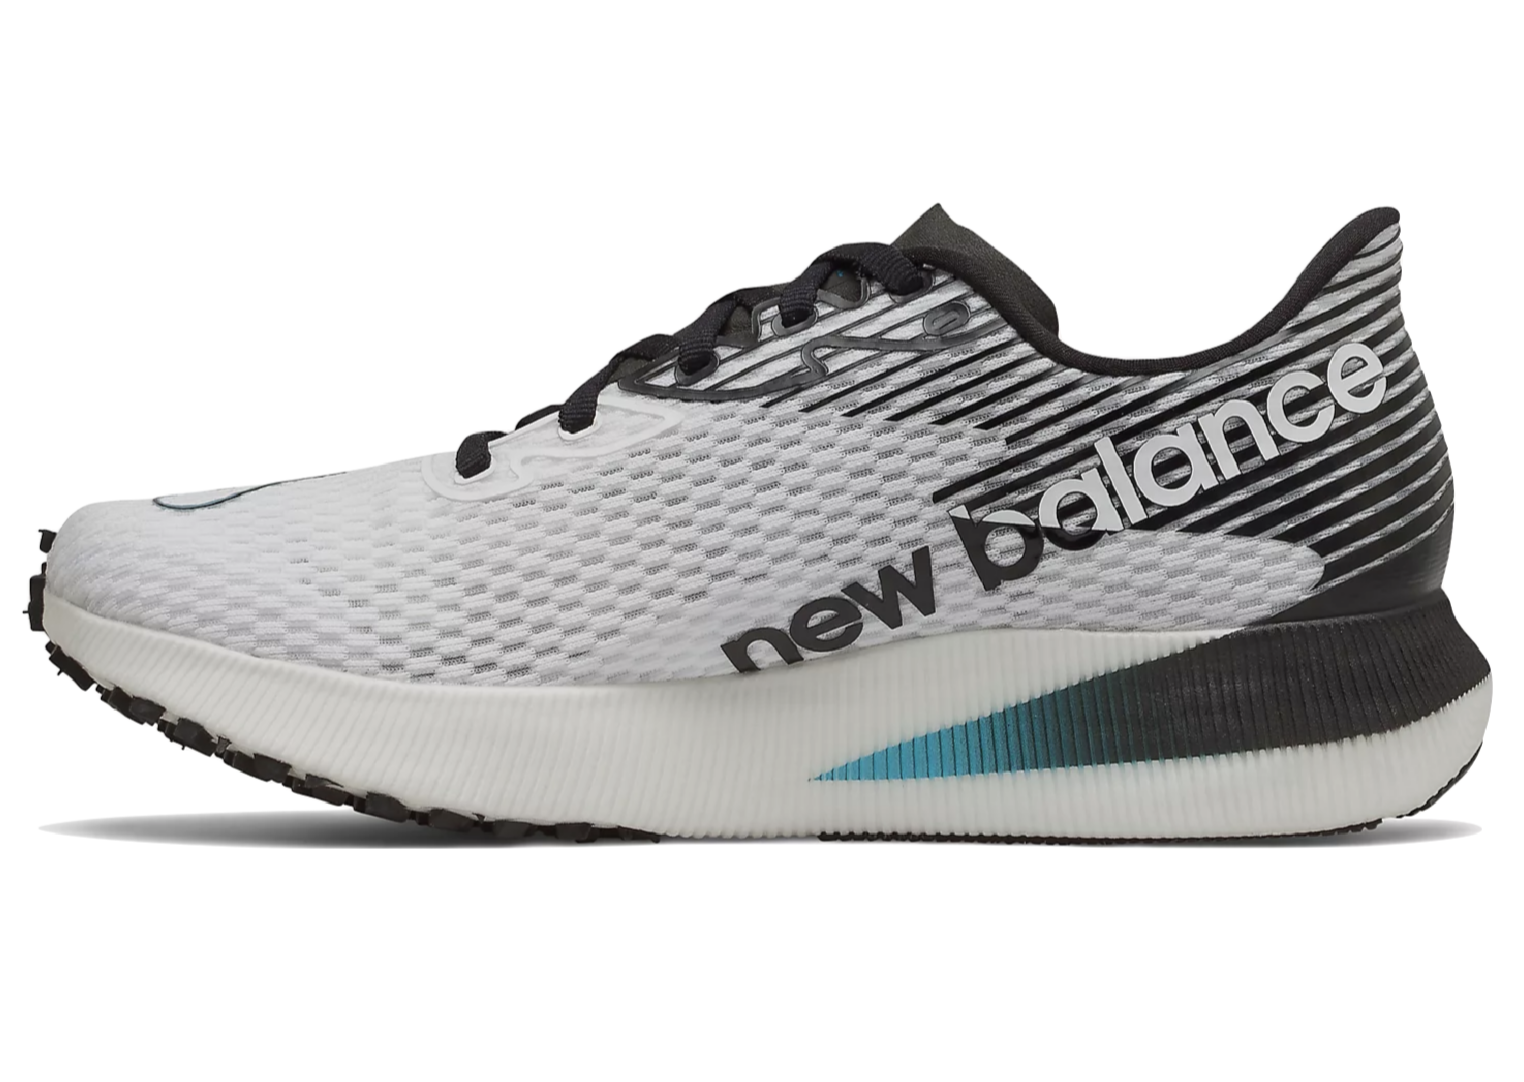 New Balance Women's FuelCell RC Elite – Portland Running Company